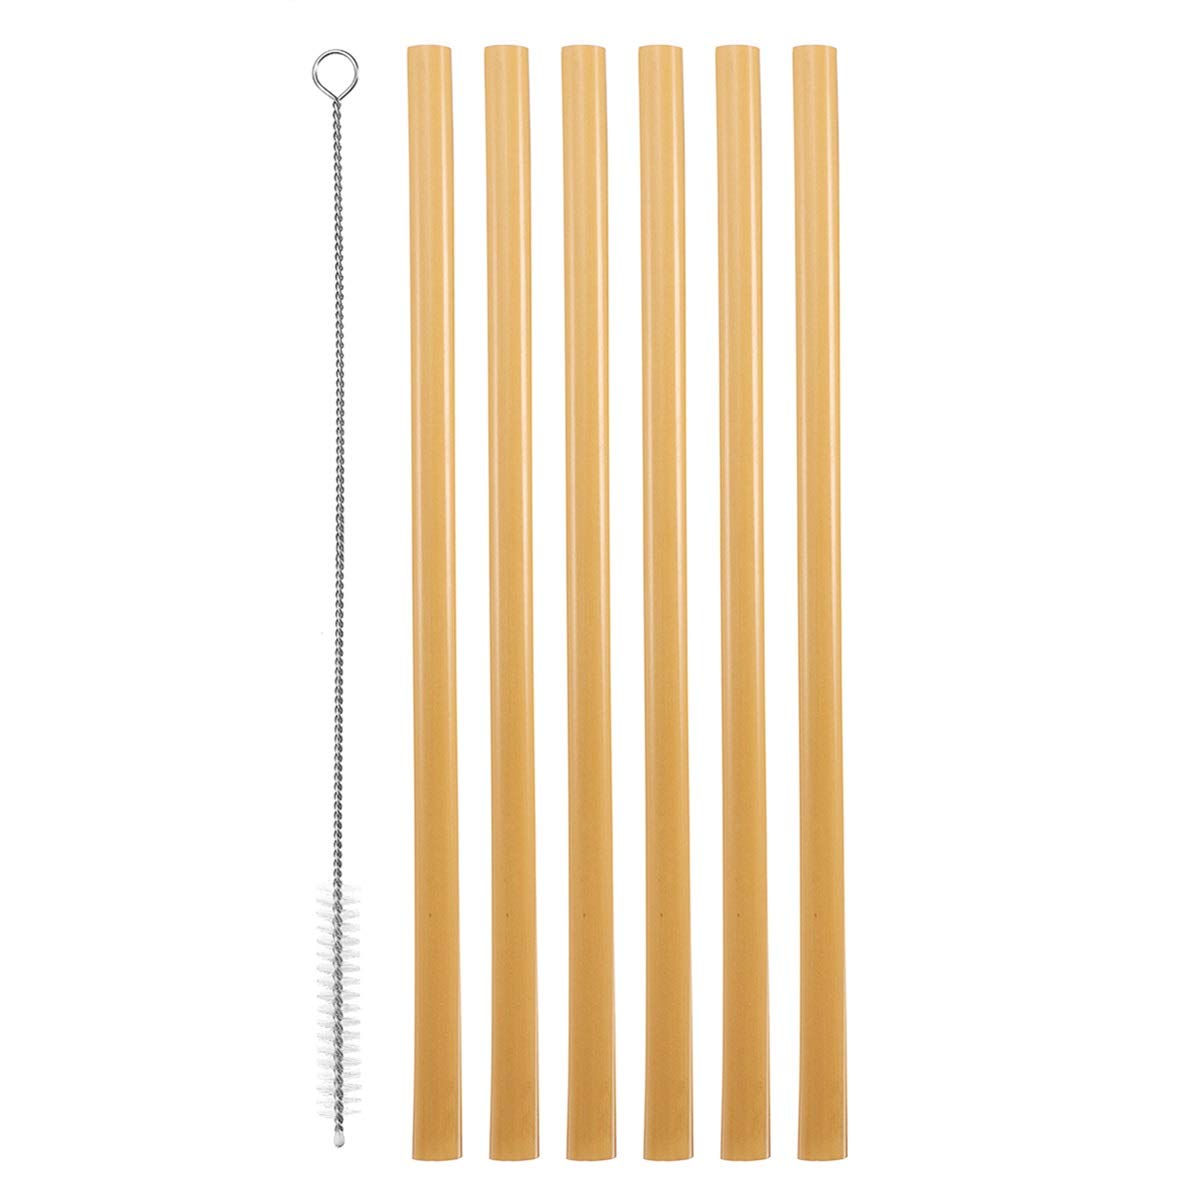 NJ Organic Bamboo Straws with Cleaning Brush 9 Inches,Biodegradable Reusable Straw for Kids and Adults, Handcrafted Natural Alternative to Plastic, BPA Free Non-Toxic and No Inks Dyes Straws:6 Pcs